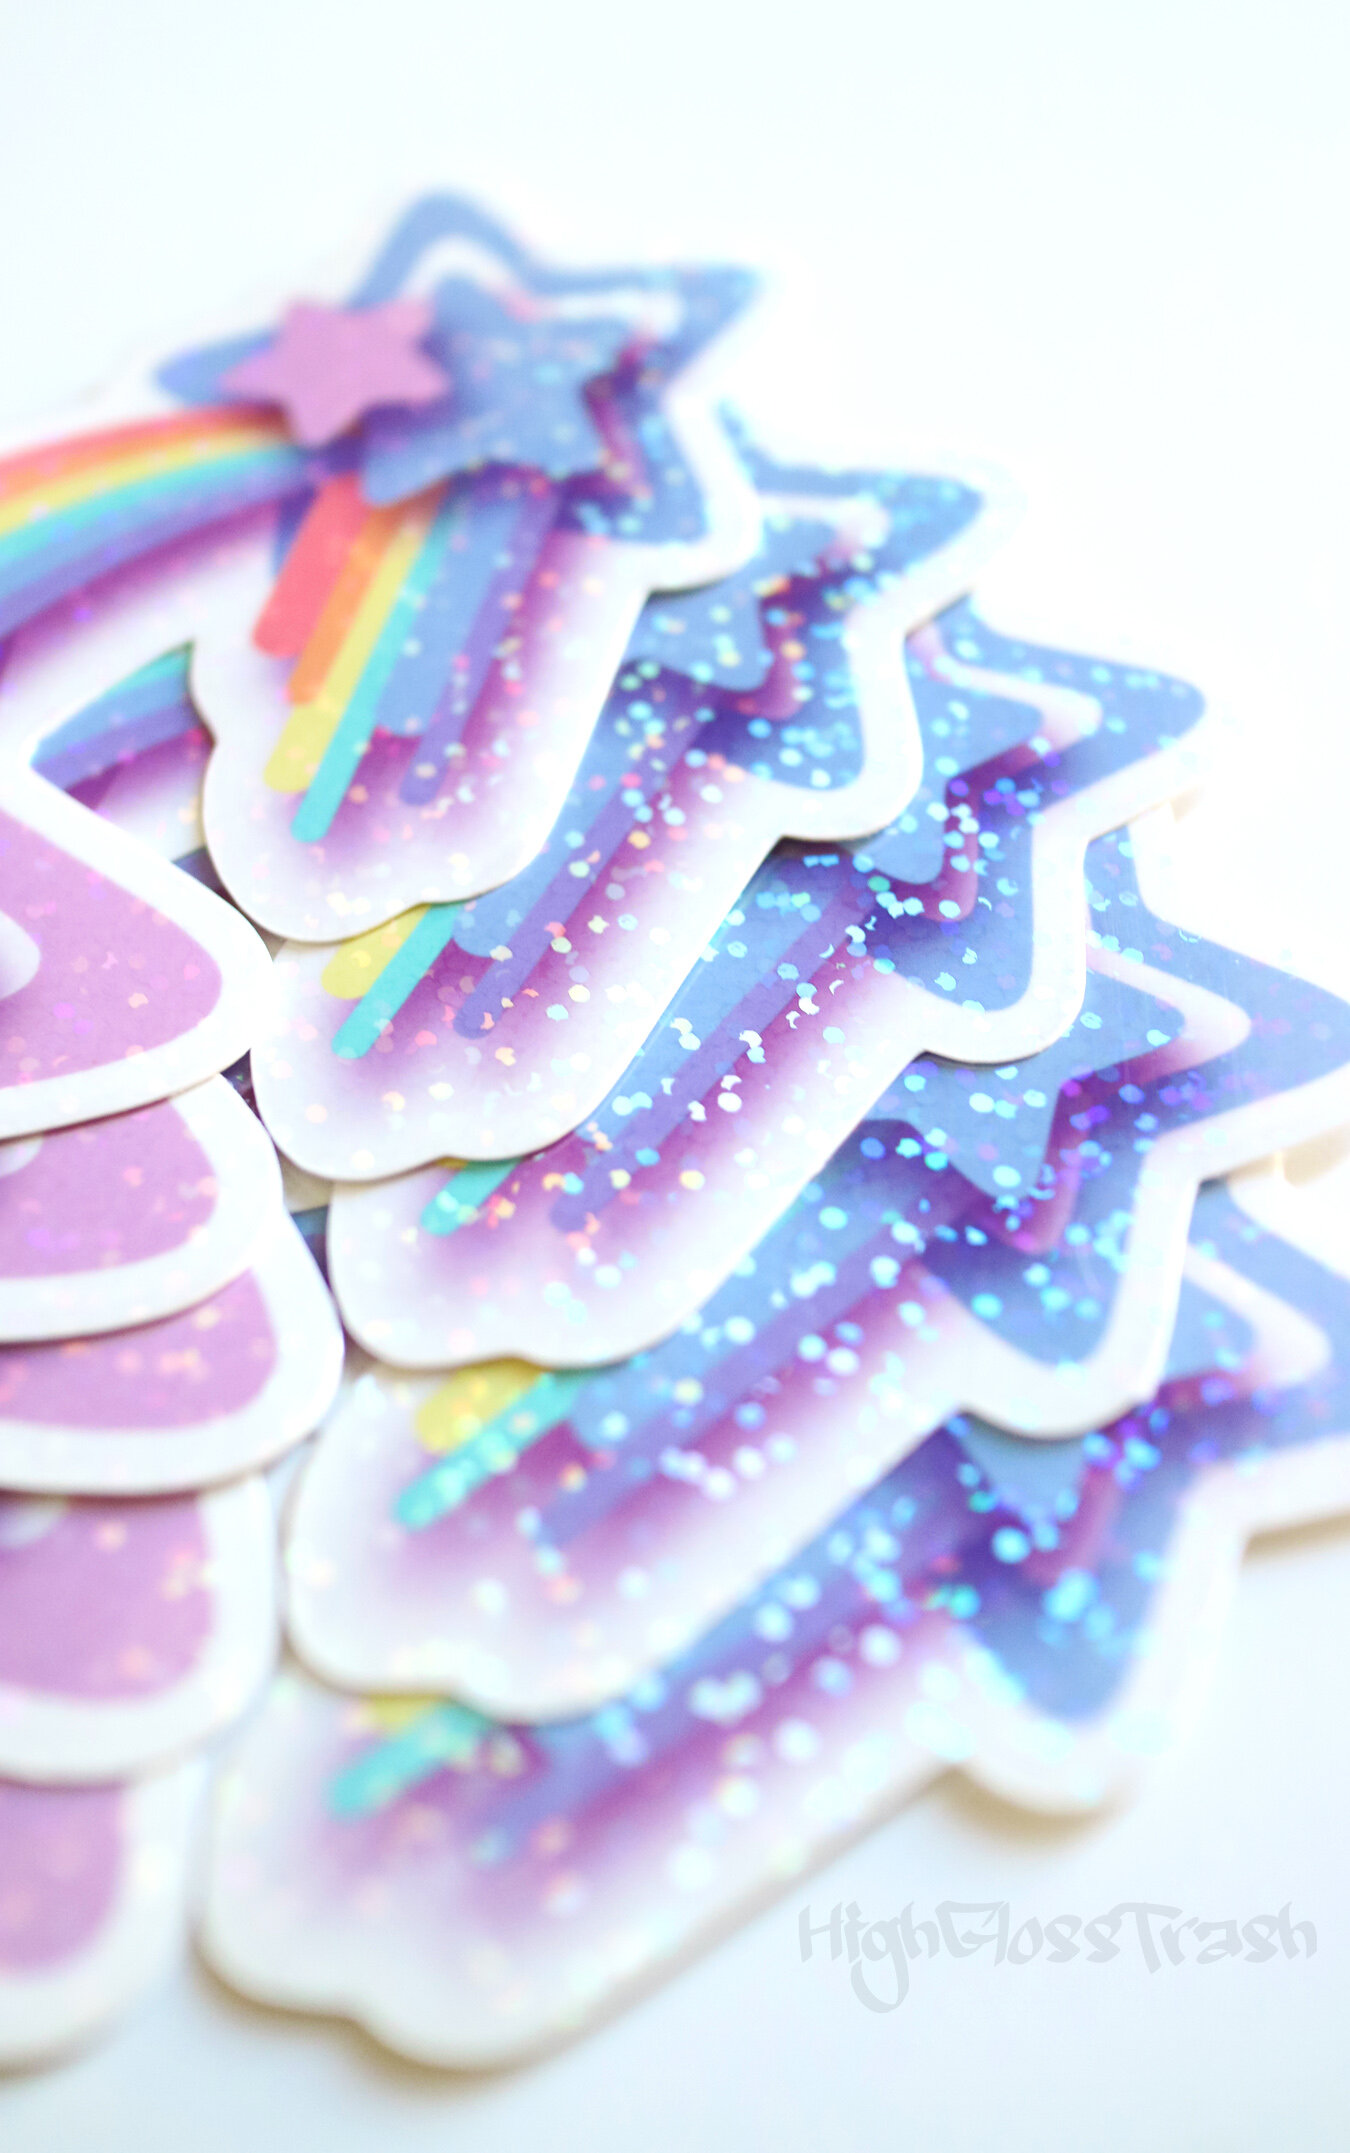 Blue starry holographic glossy sticker